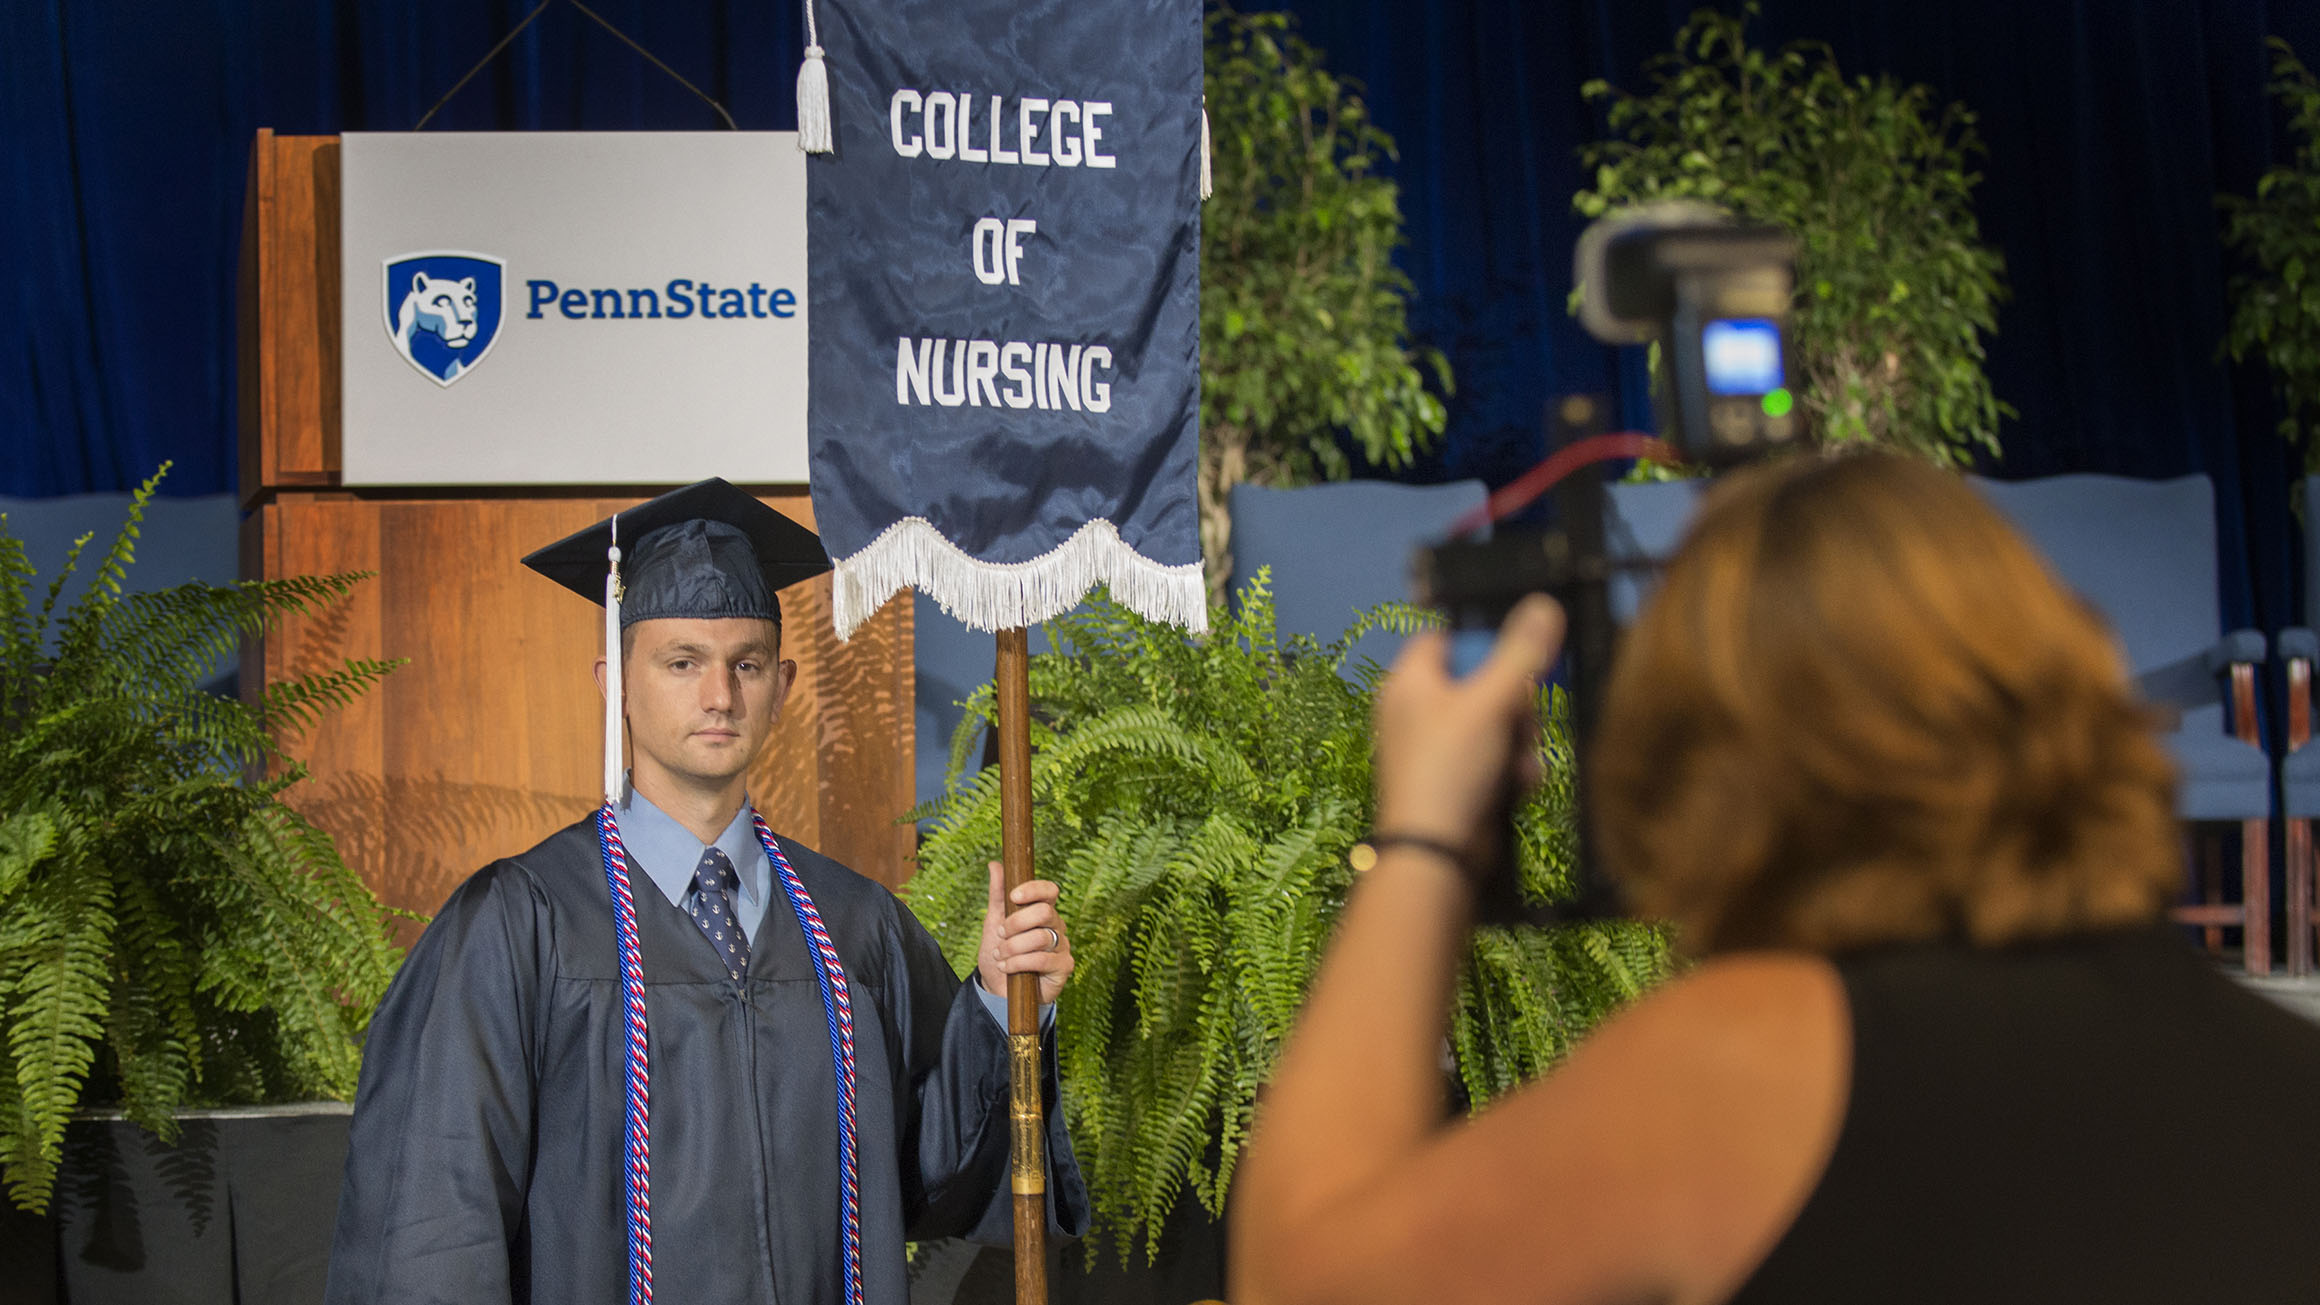 Brian Artiles holds a flag for the College of Nursing as its student marshal in 2017